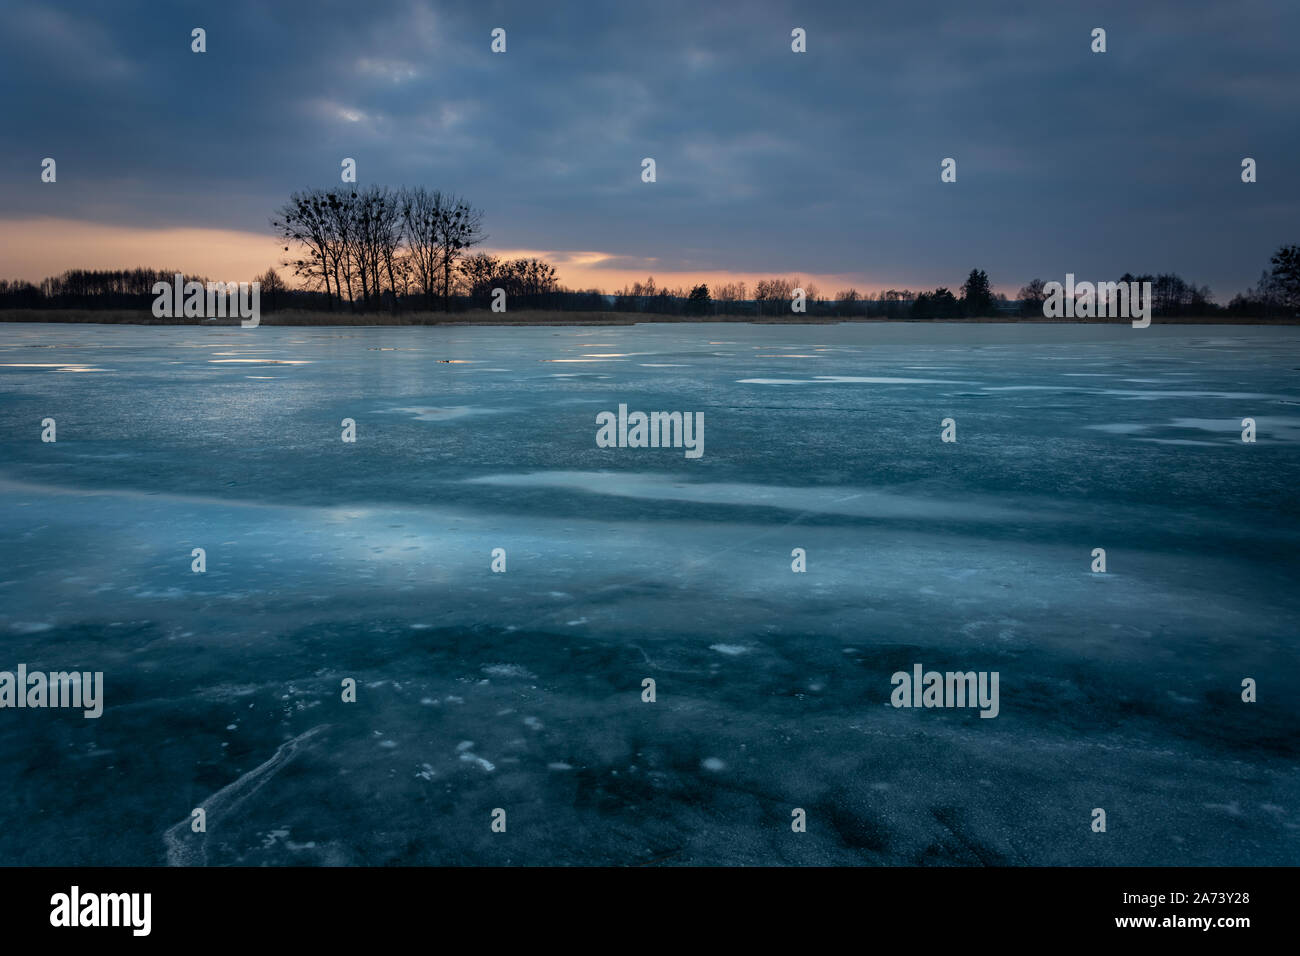 https://c8.alamy.com/comp/2A73Y28/ice-on-a-frozen-lake-trees-on-the-horizon-and-dark-cloud-on-the-sky-evening-view-2A73Y28.jpg